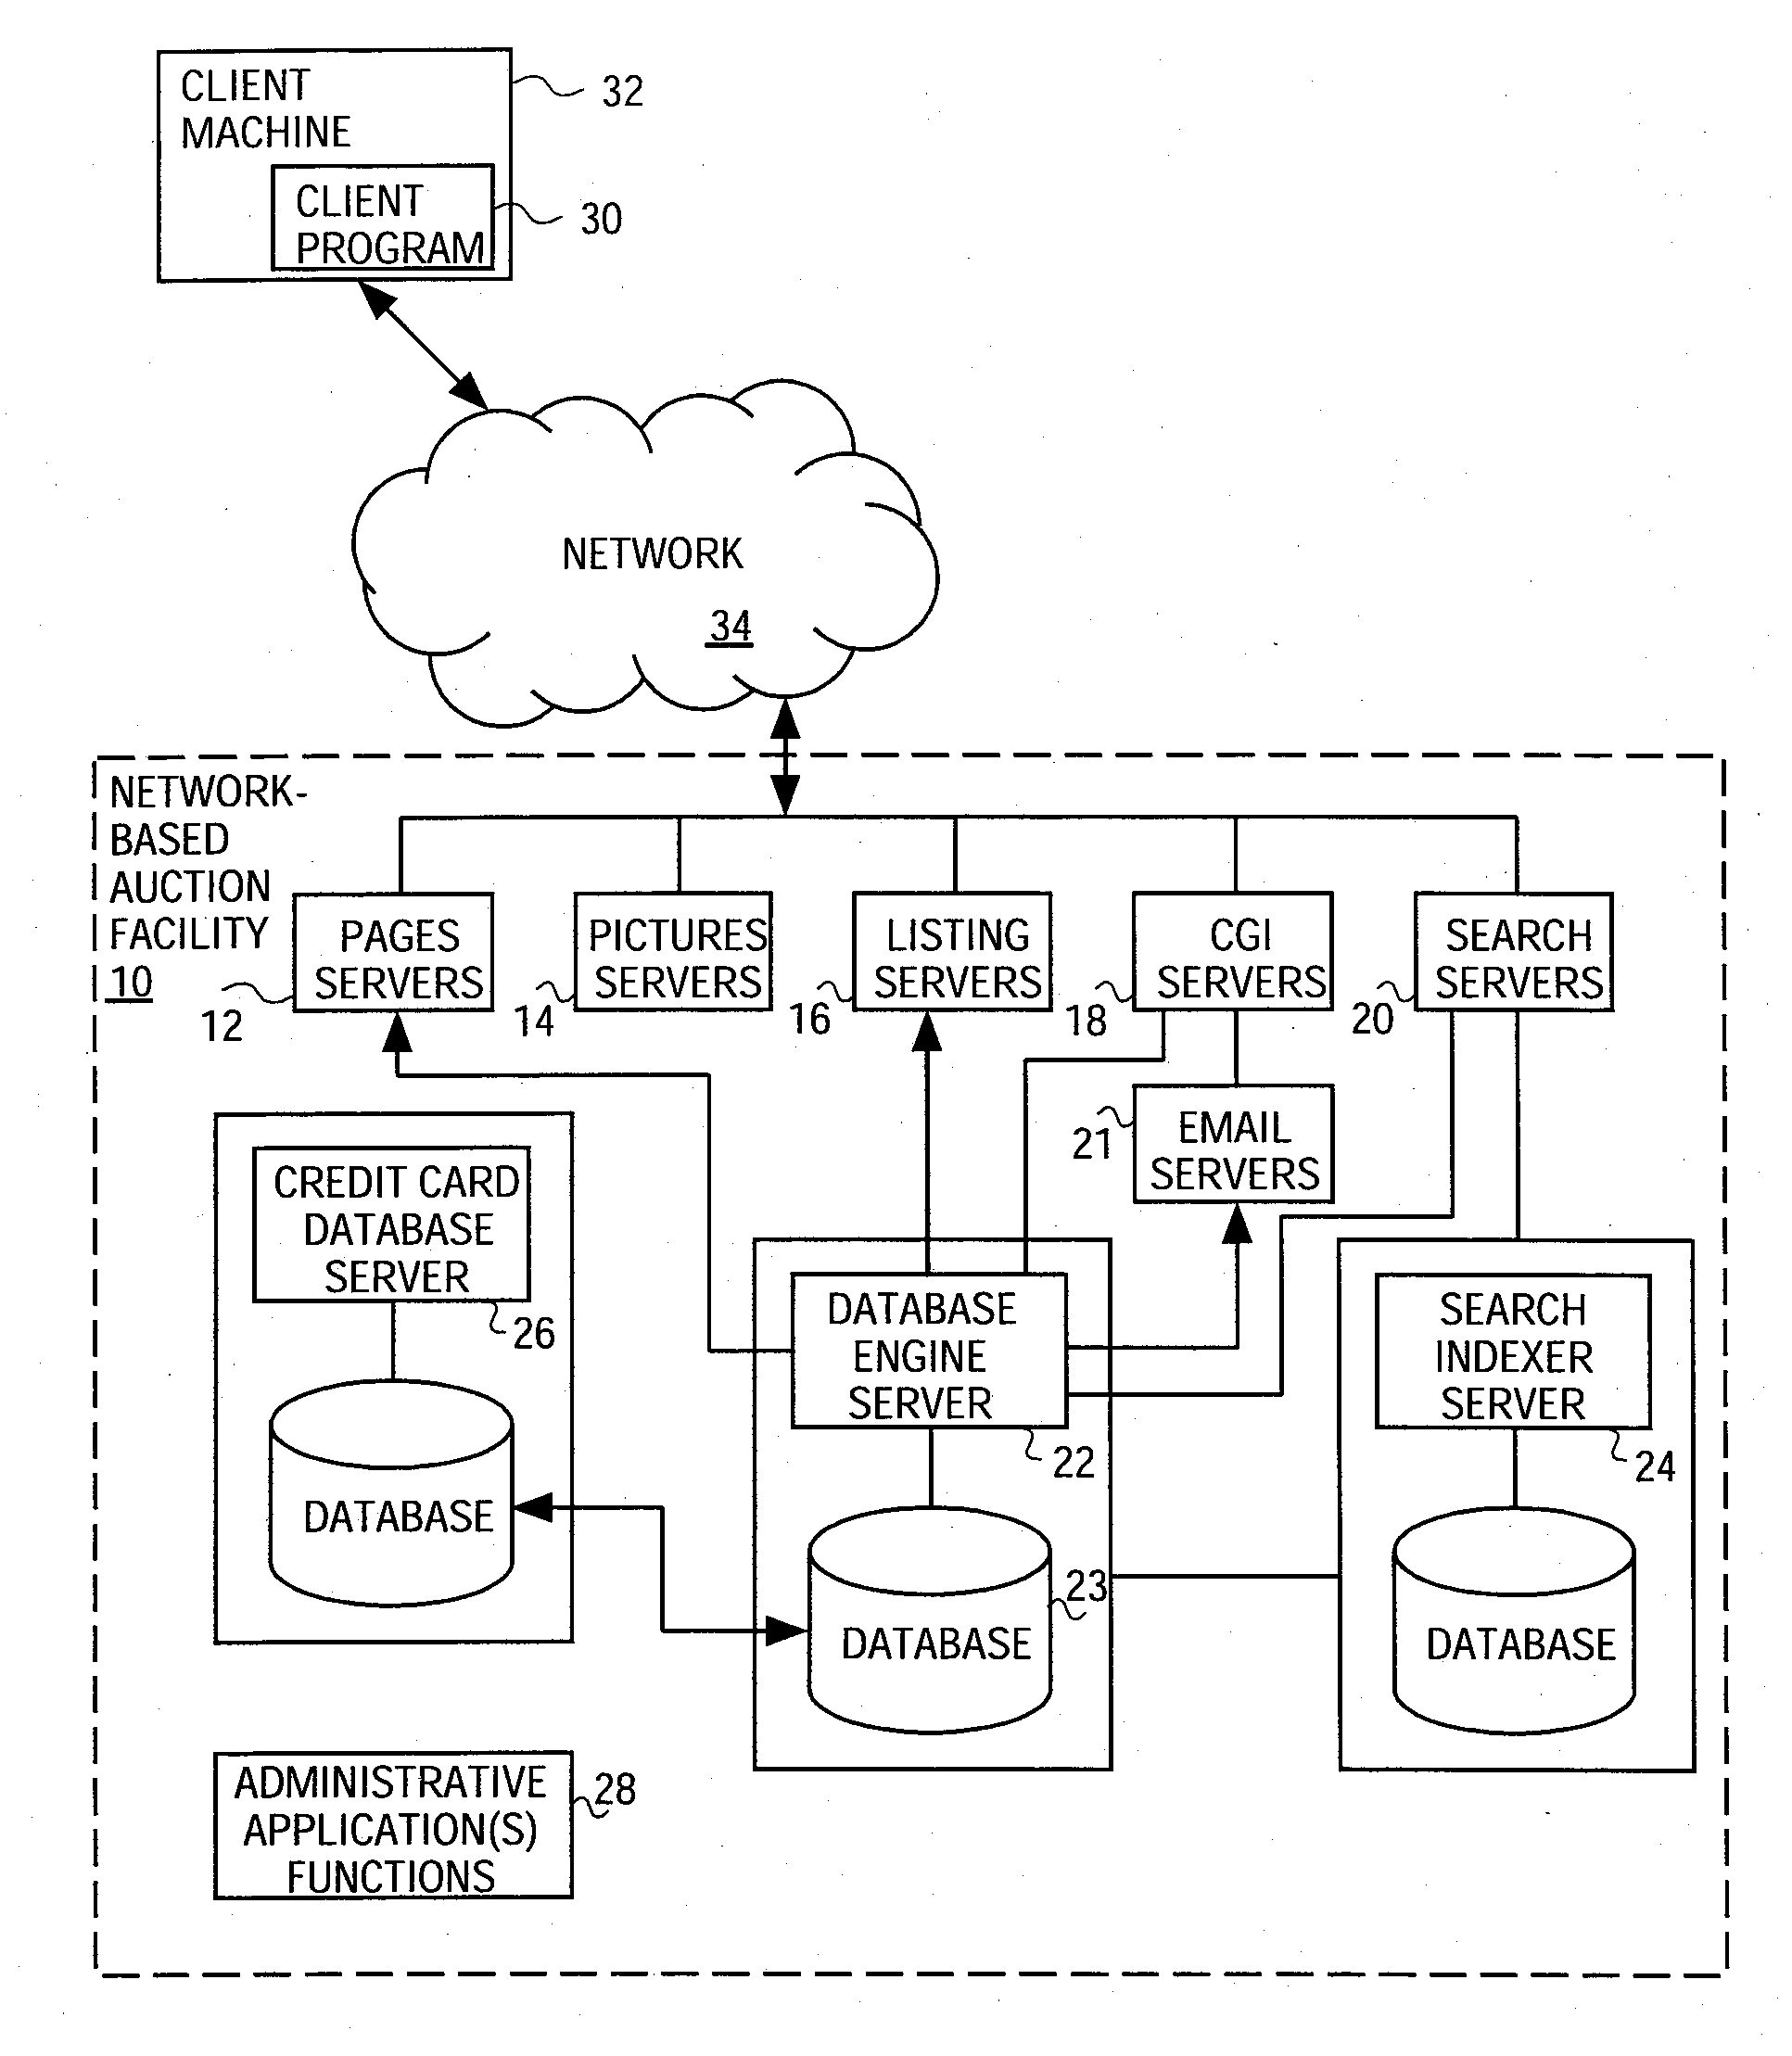 System and method to facilitate translation of communications between entities over a network